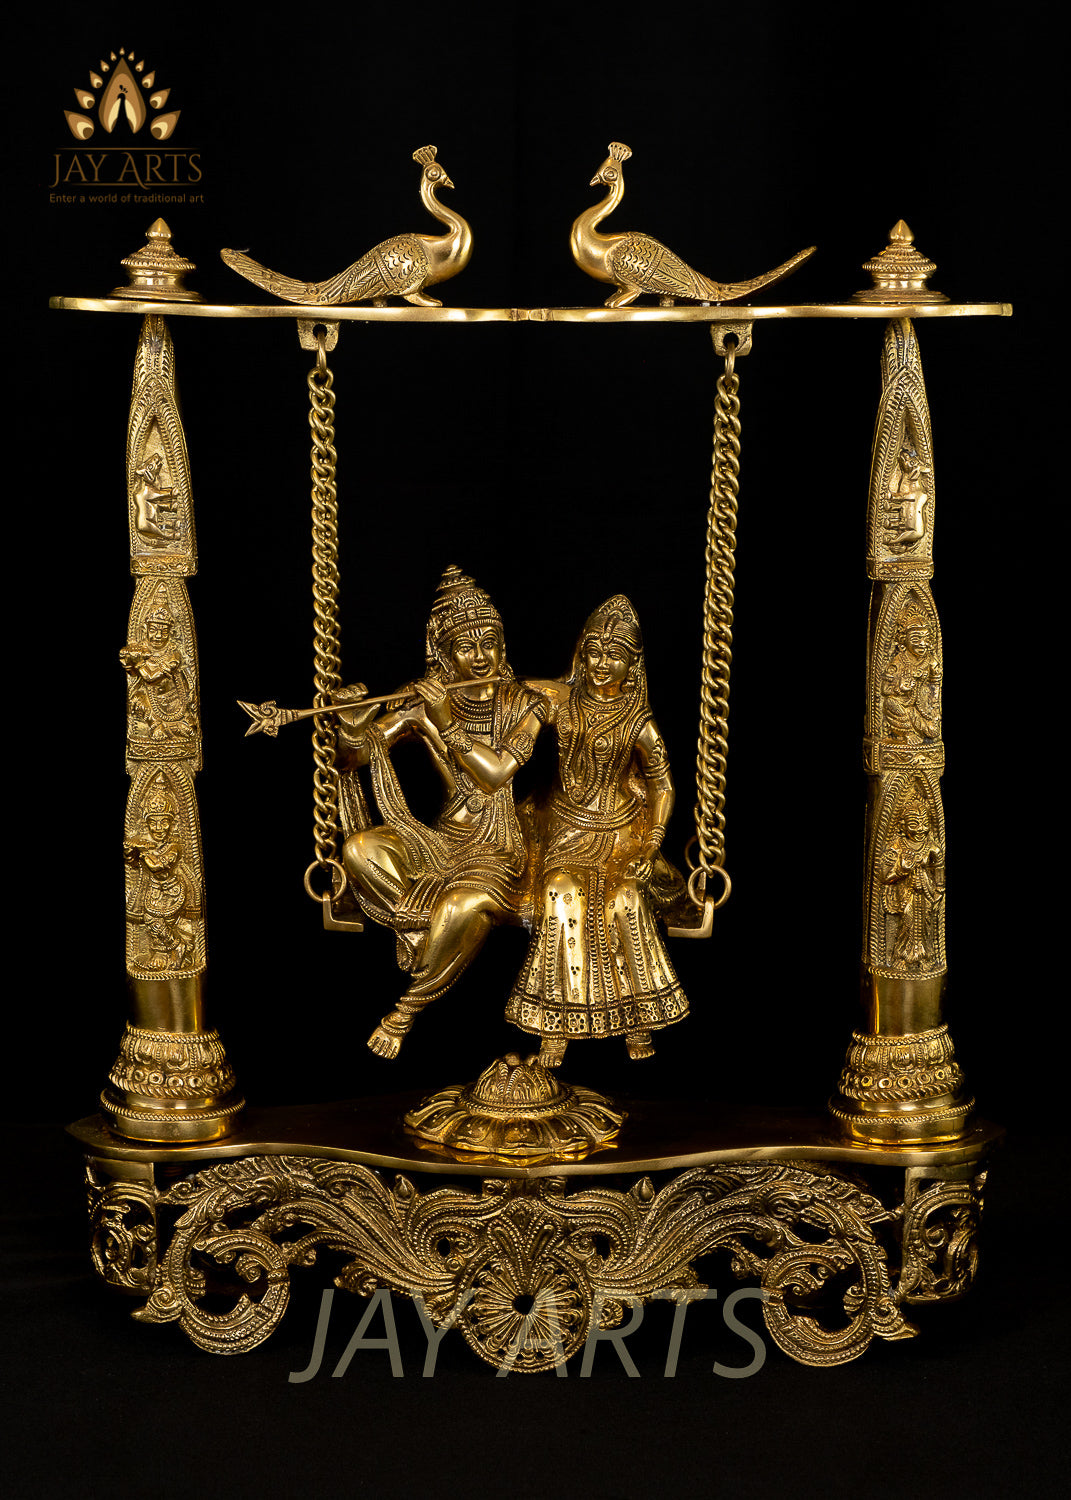 Radha Krishna on a Swing 18" - A Blissful Moment of the Soulful Couple